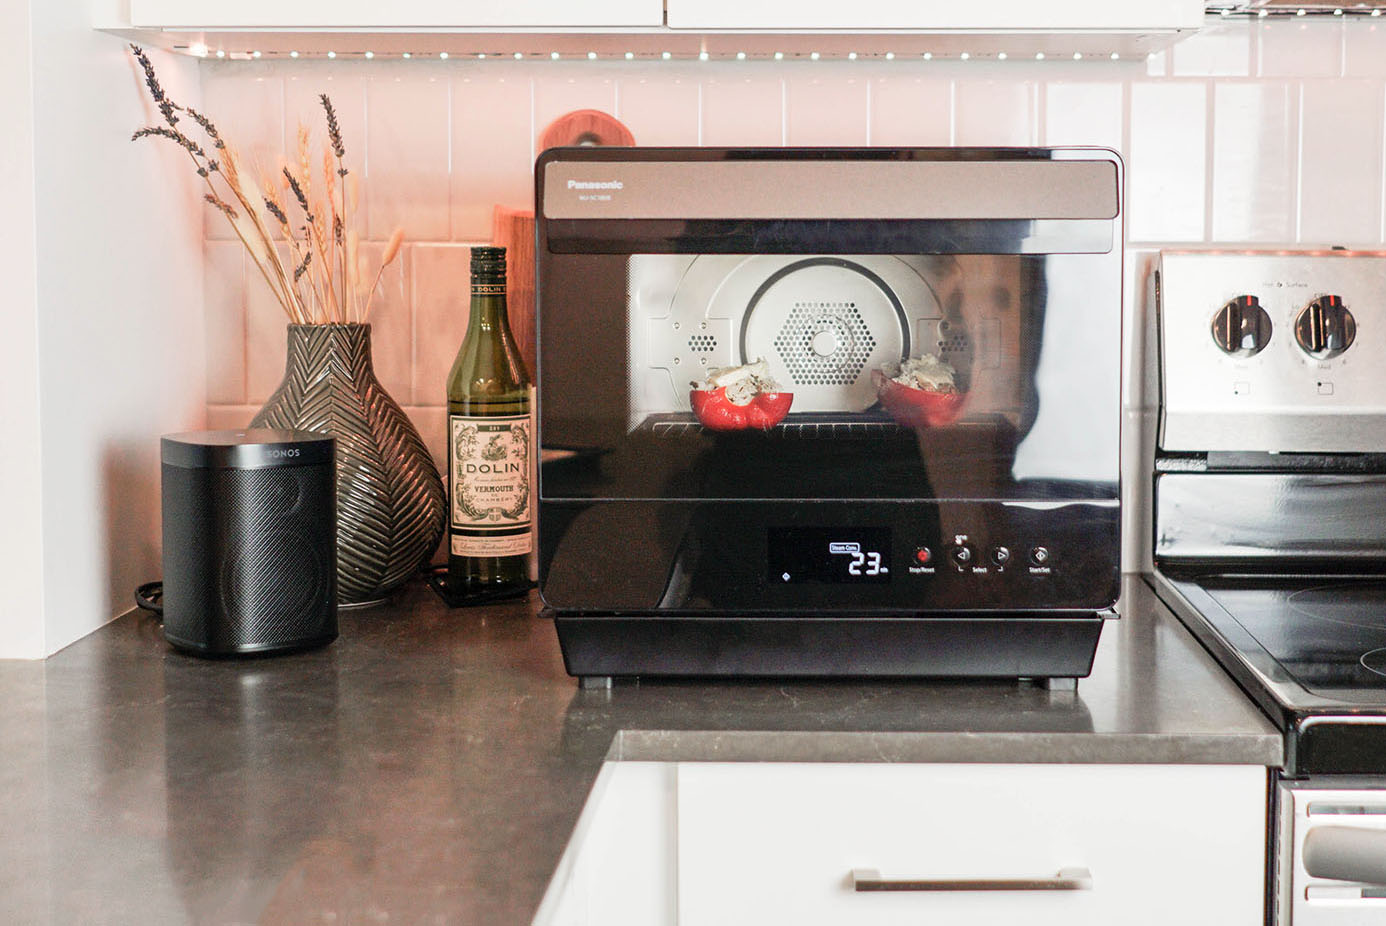 Panasonic steam oven review 1